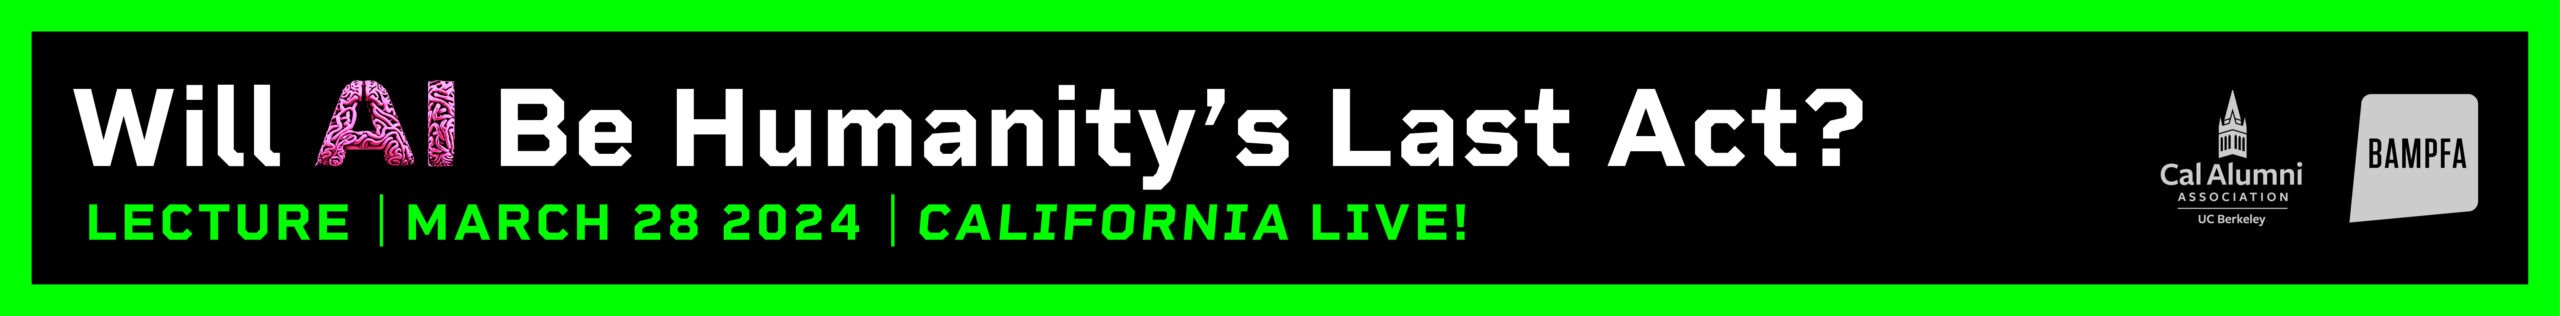 California Live Will AI Be Humanity's Last Act?